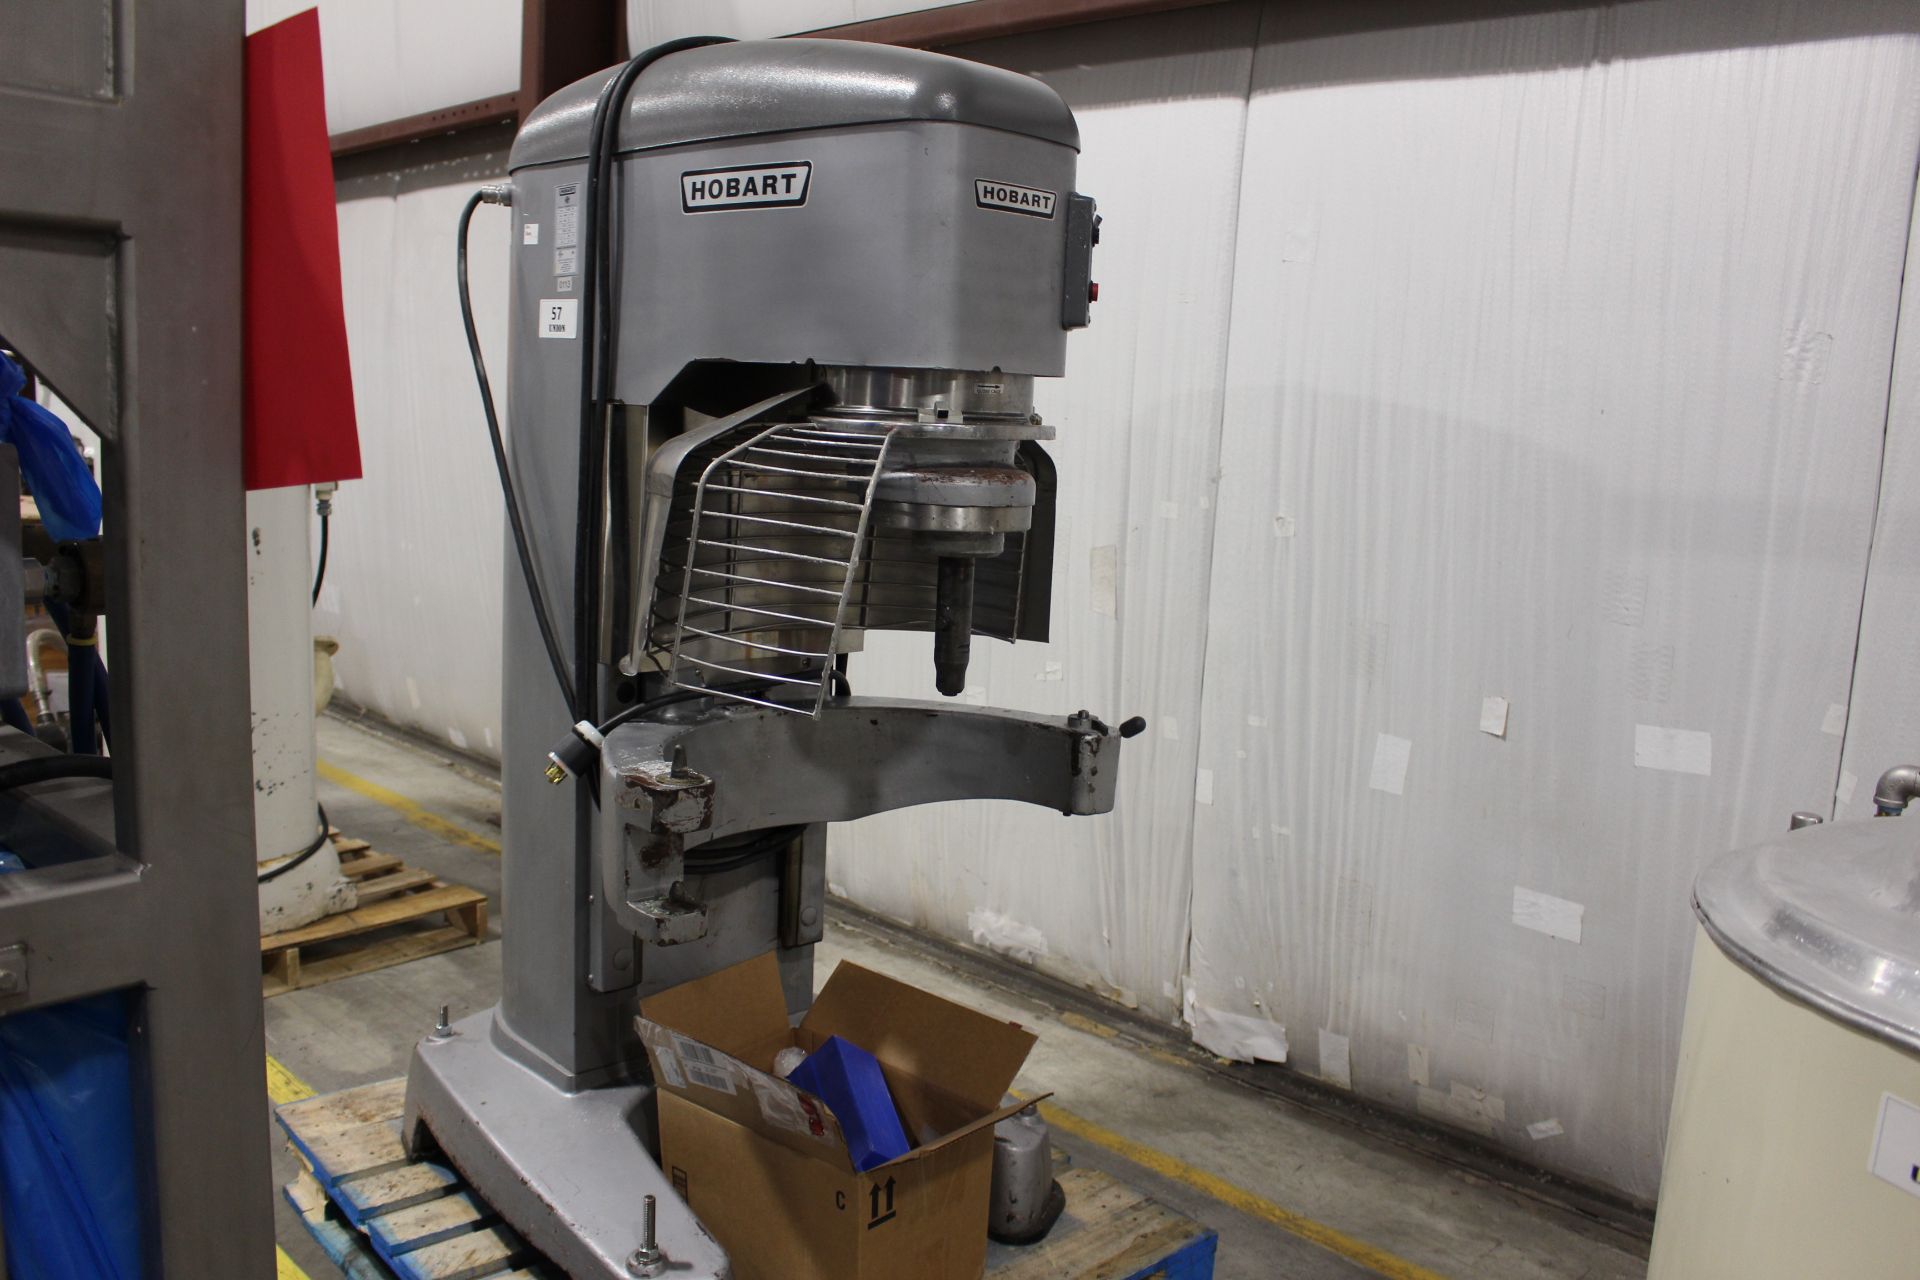 Asset 57 - Hobart Legacy model HL1400 140-qt Mixer, serial#31-1498-070, 5 HP, 3 phase, 60 cycle, - Image 4 of 4